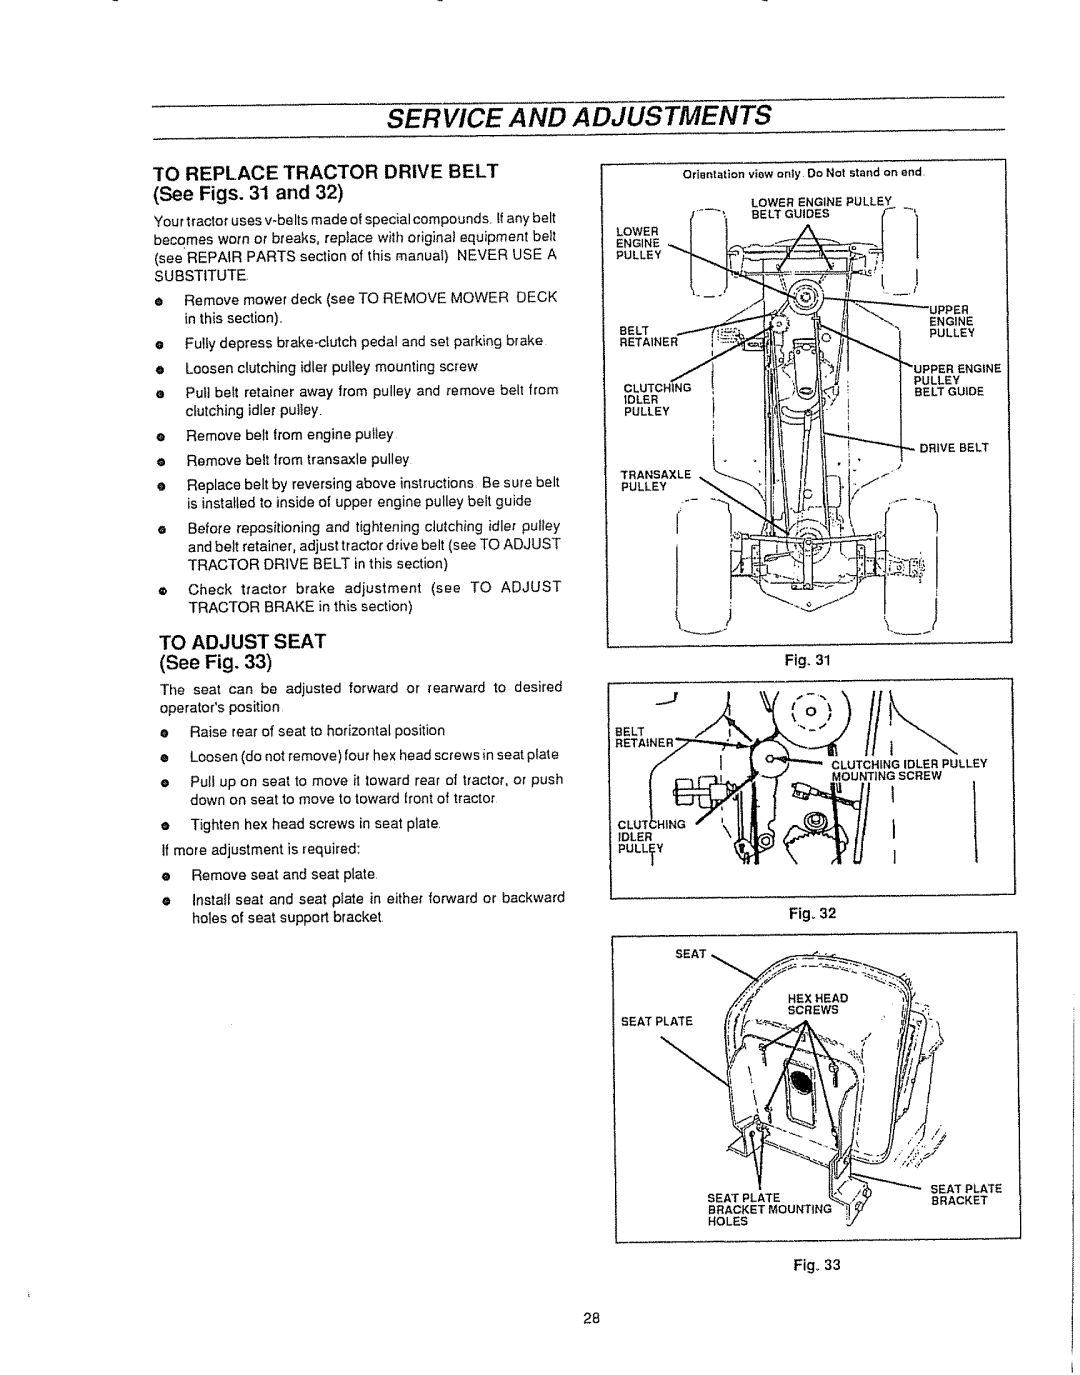 Sears 536.25587 rULER, t ; LTGU,D, Lower, Service And Adjustments, See Fig, To Replace Tractor Drive Belt, To Adjust Seat 